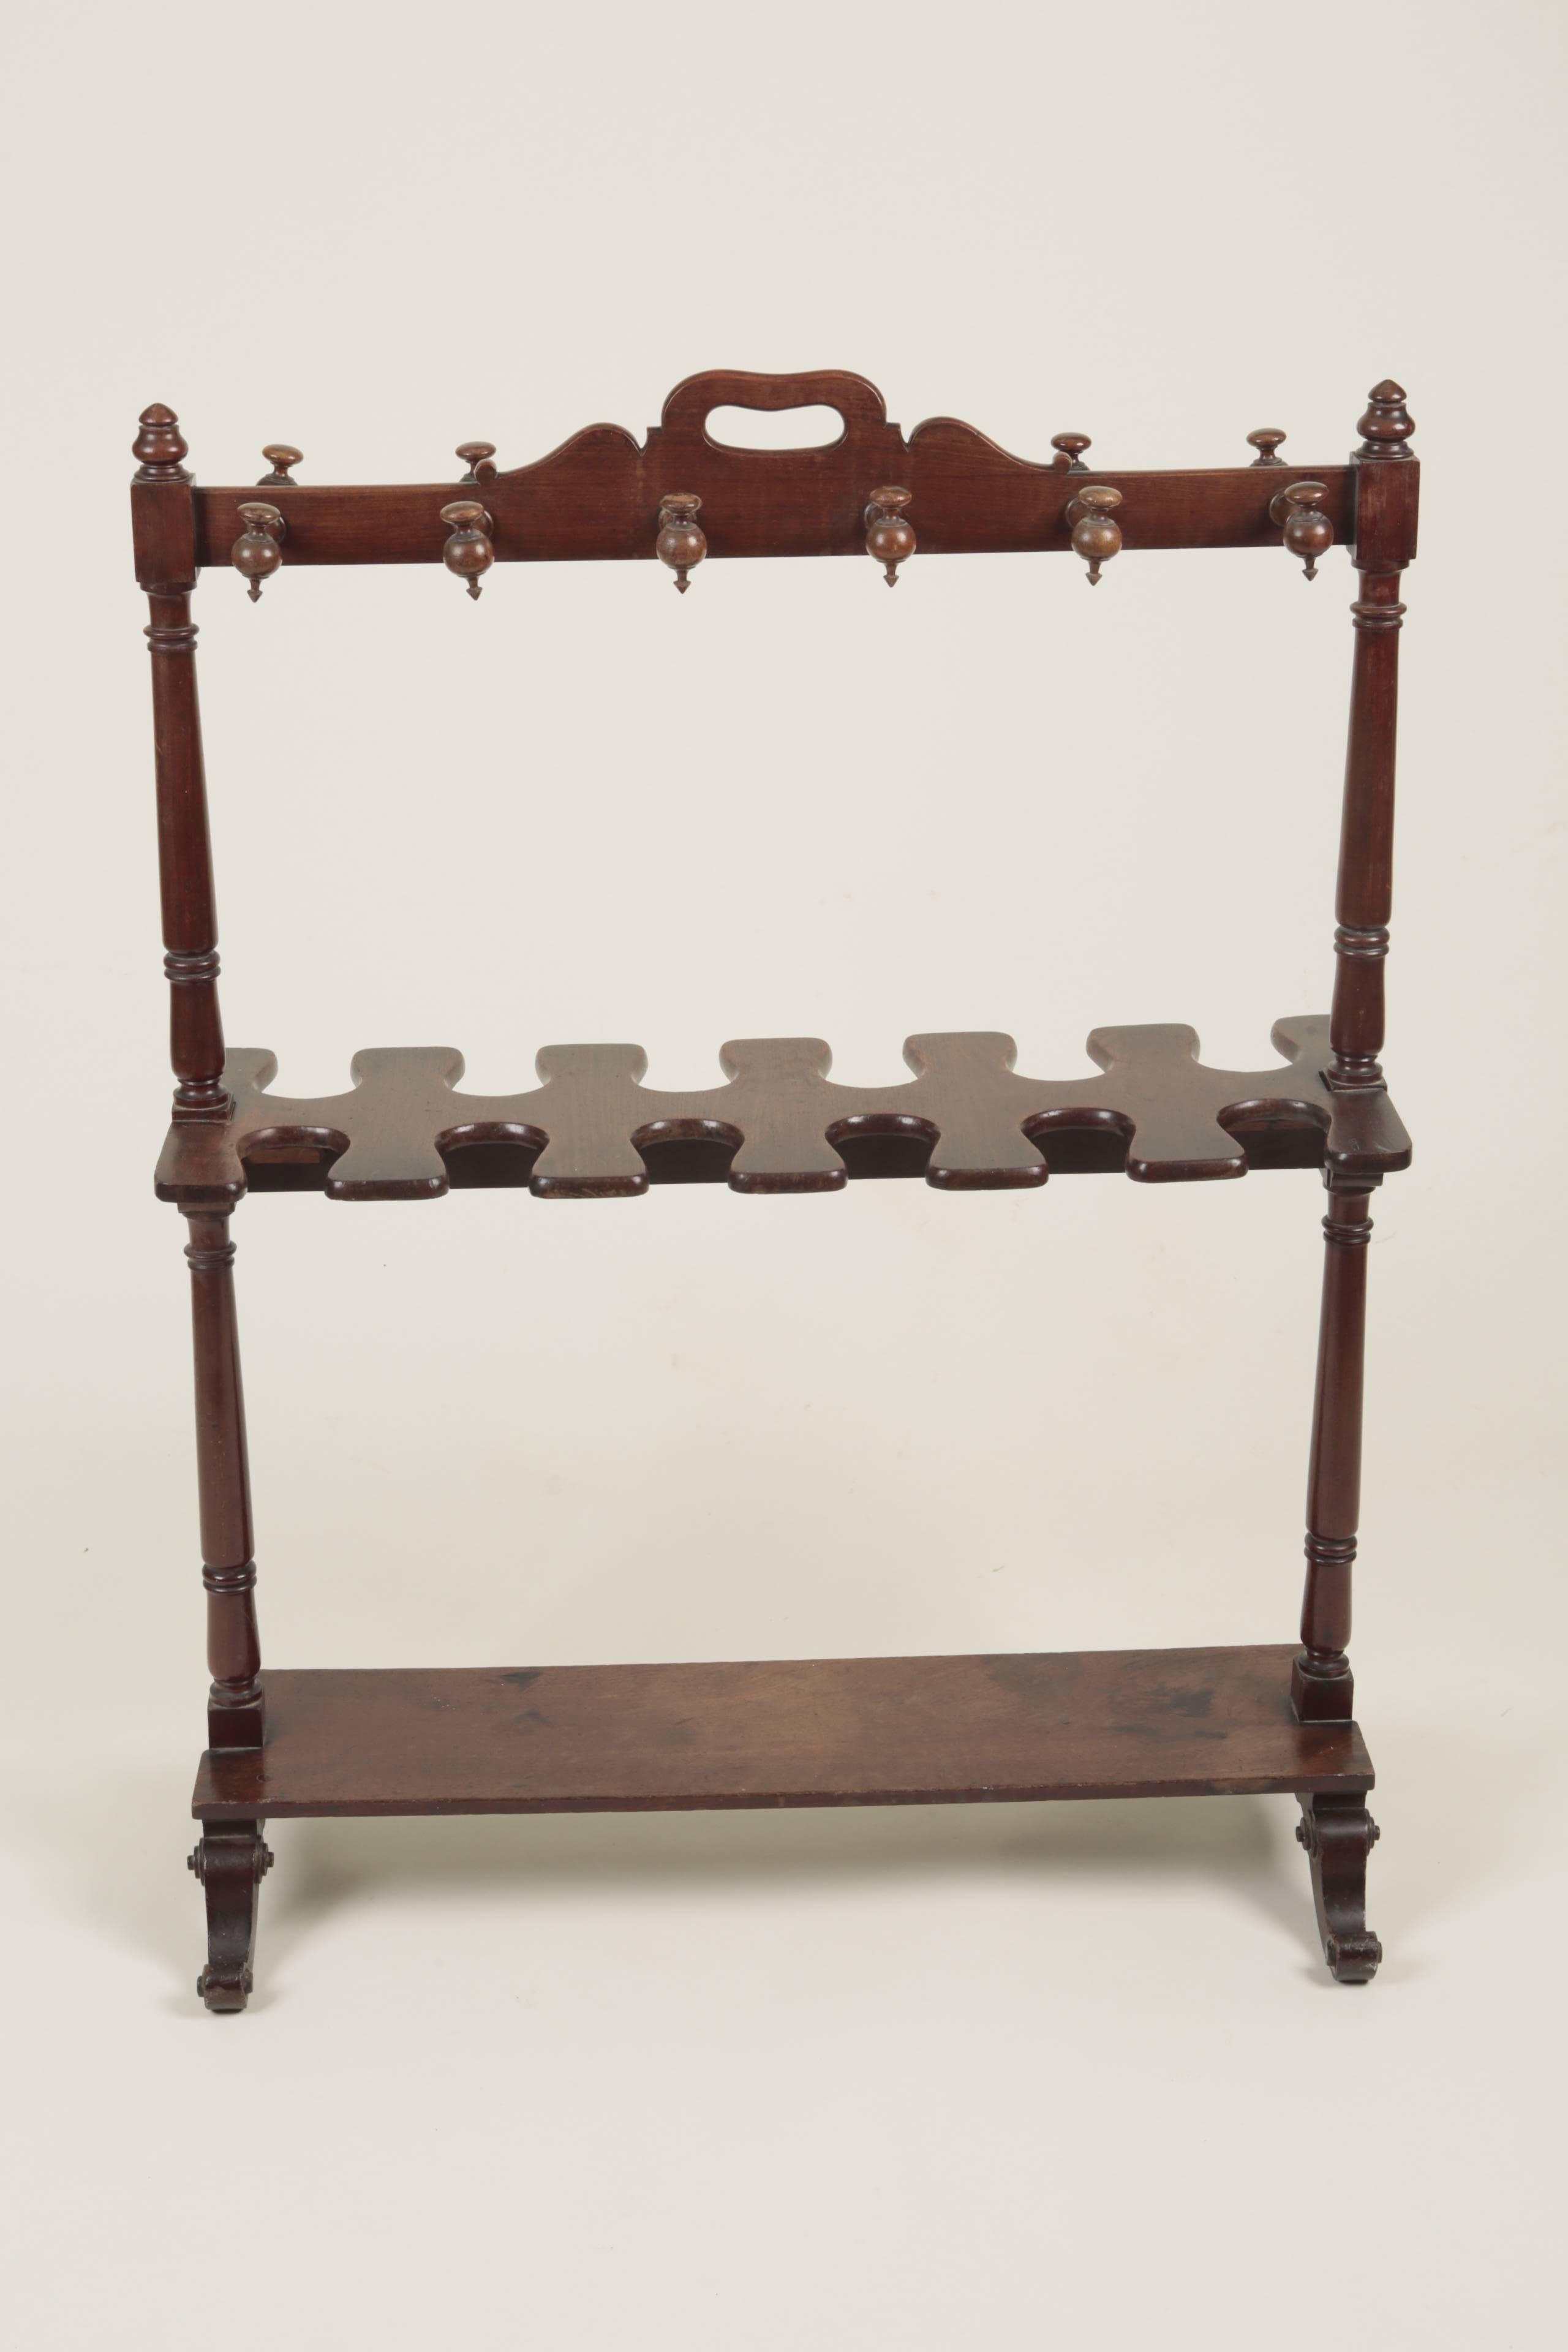 Mid-19th century mahogany boot rack and crop stand with platform base below. Good original condition.
(33cms front to back at feet).